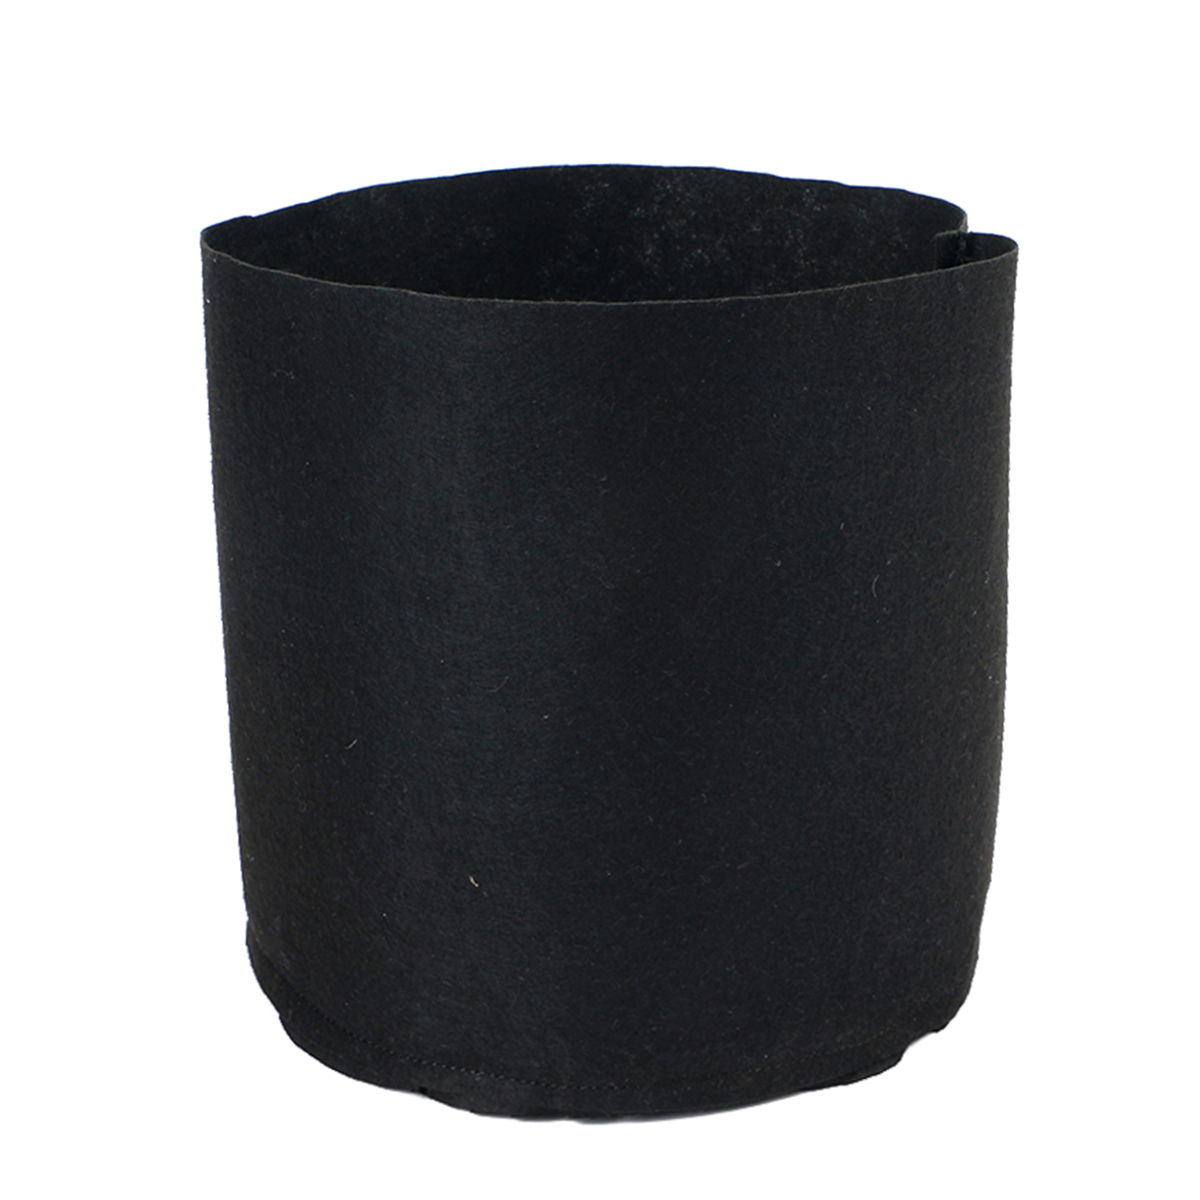 Non-woven-Fabric-Planting-Grow-Box-Vegetable-Flower-Pots-Bag-Planter-Black-with-Handles-1678096-10